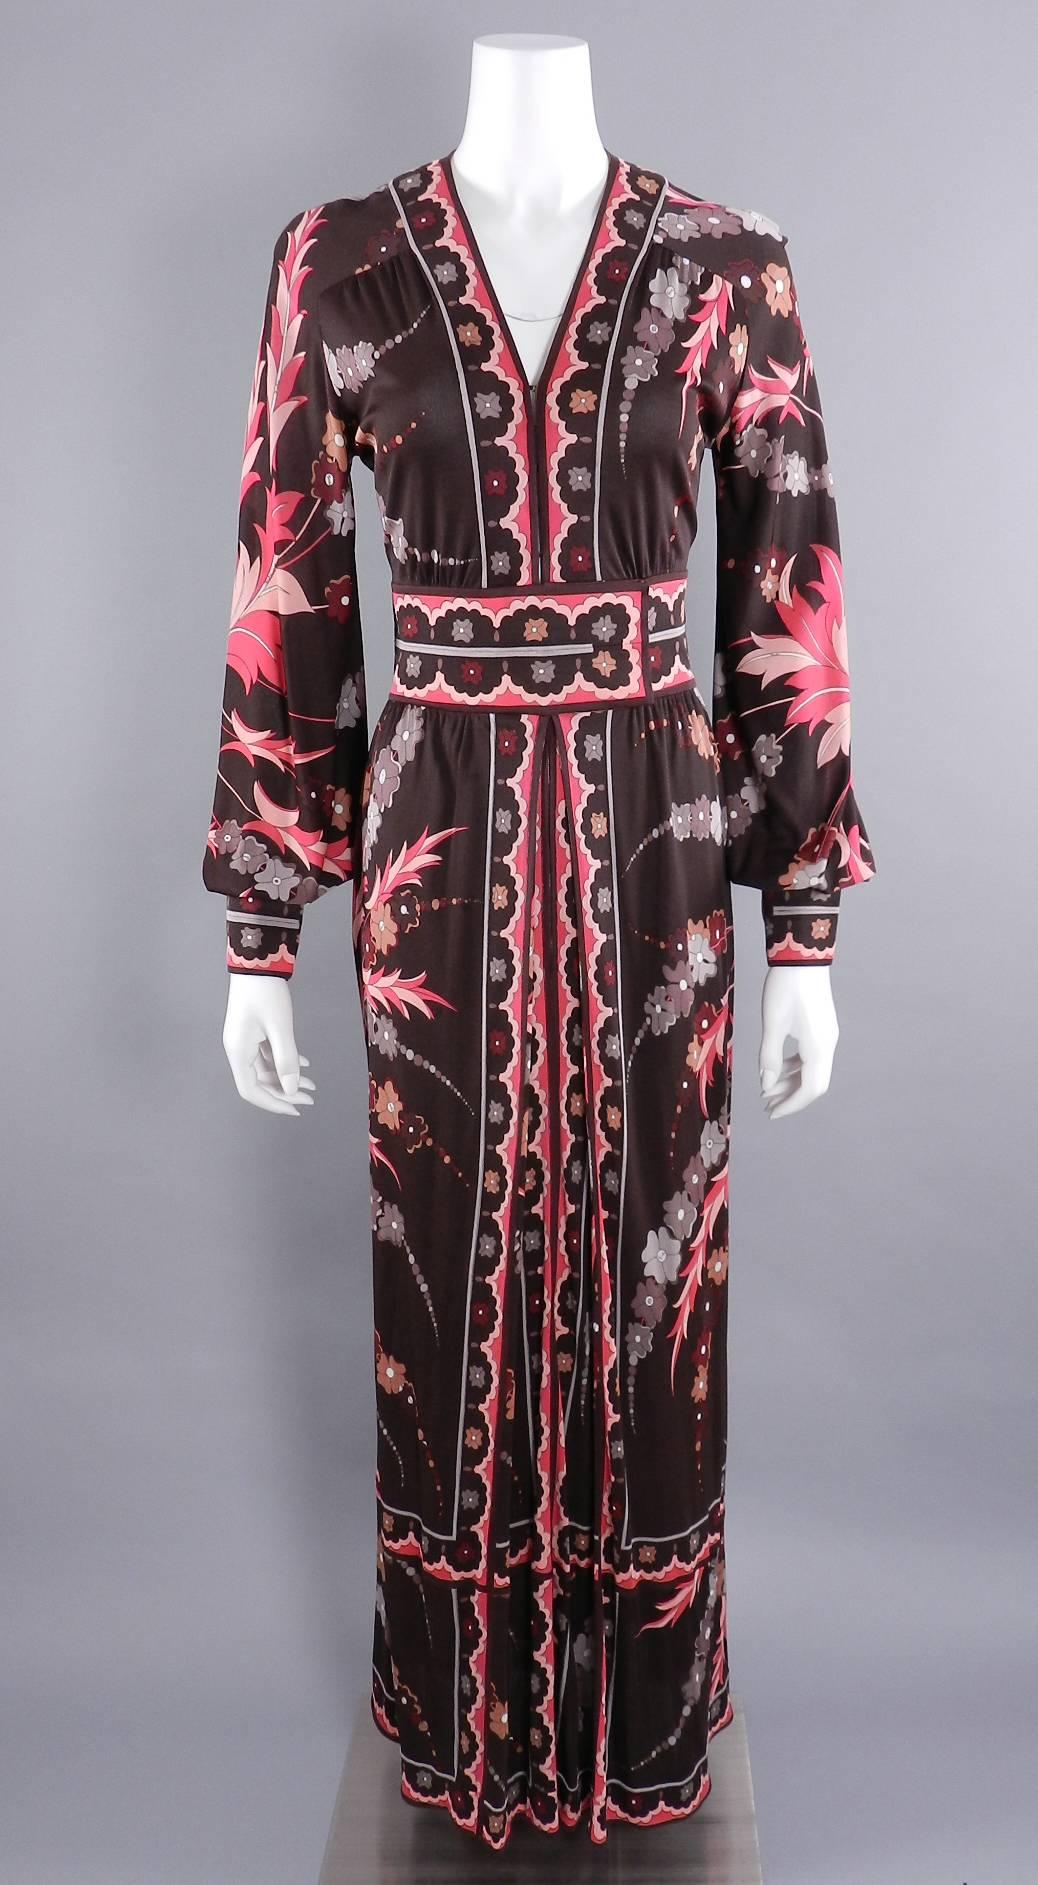 Vintage 1970's Emilio Pucci Pink and Brown Long Jersey Dress 4